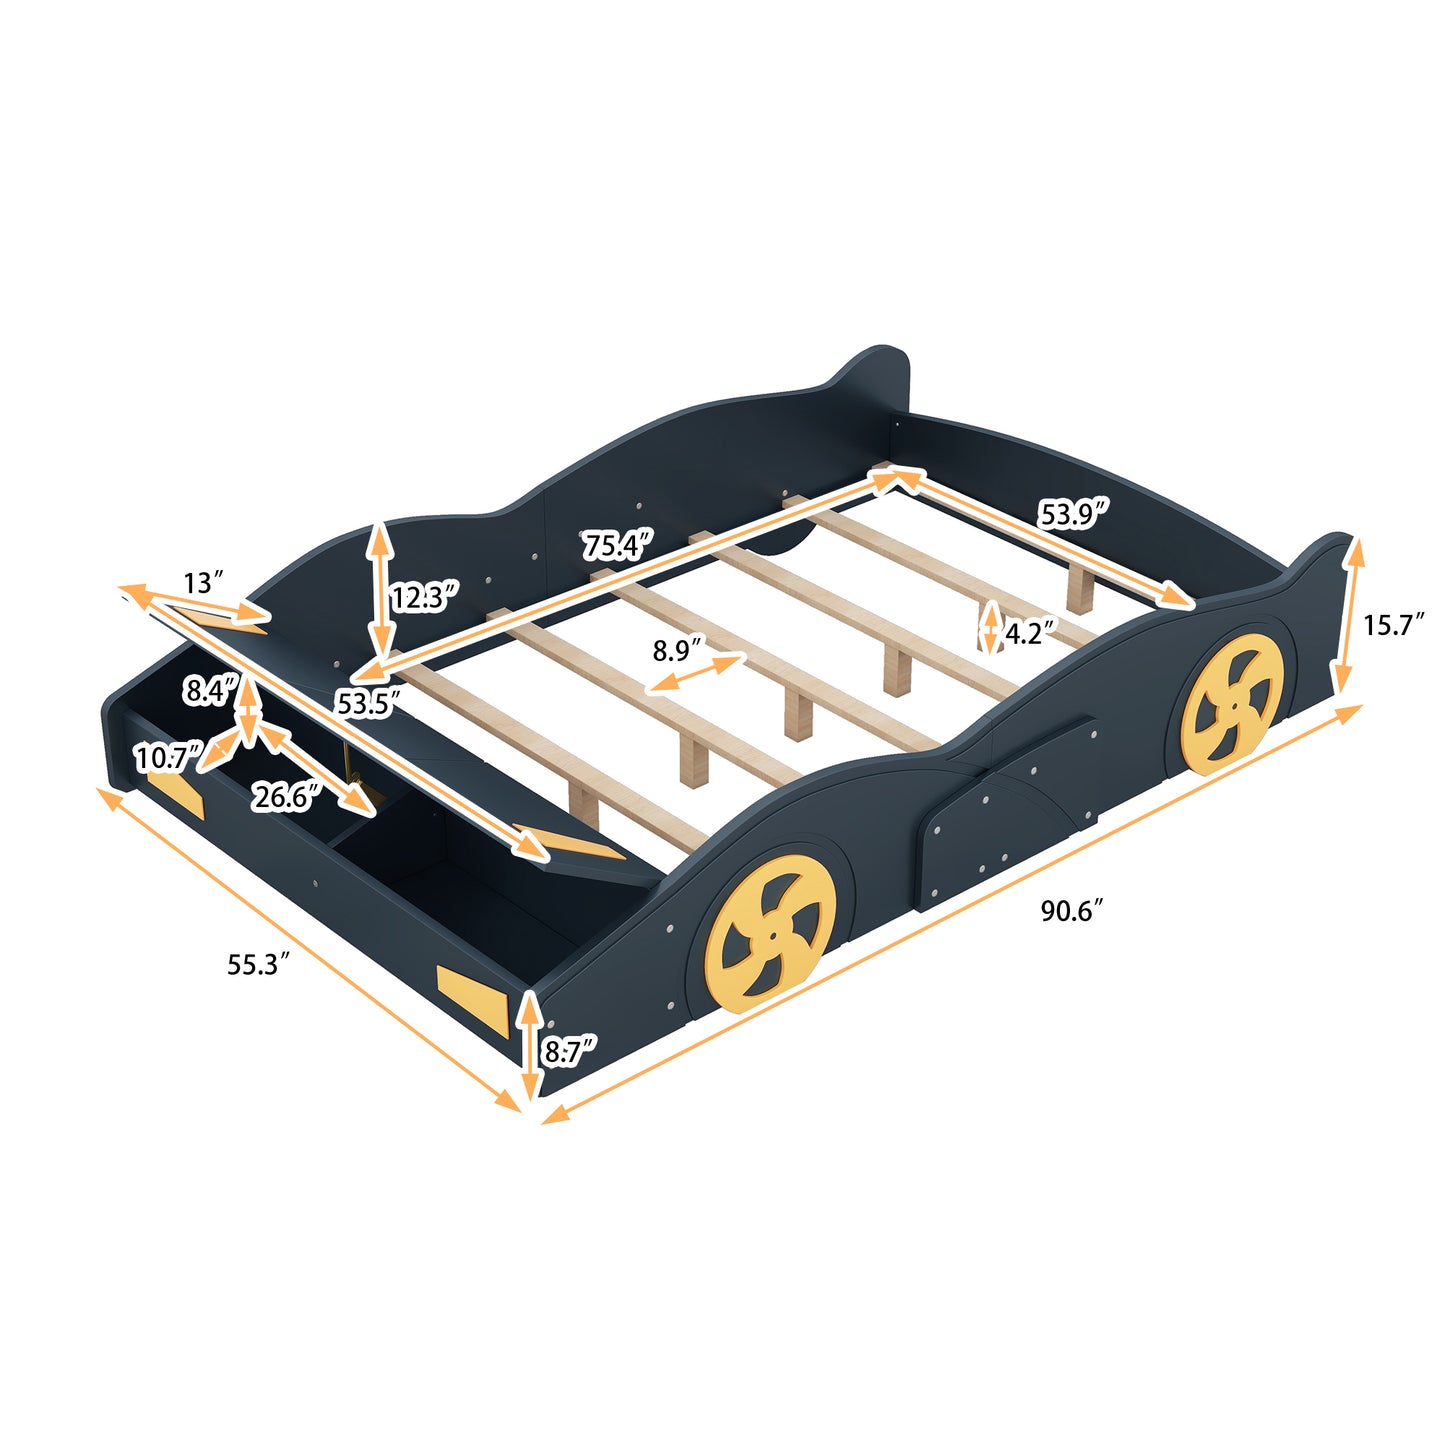 Full Size Race Car-Shaped Platform Bed with Wheels and Storage, Dark Blue+Yellow